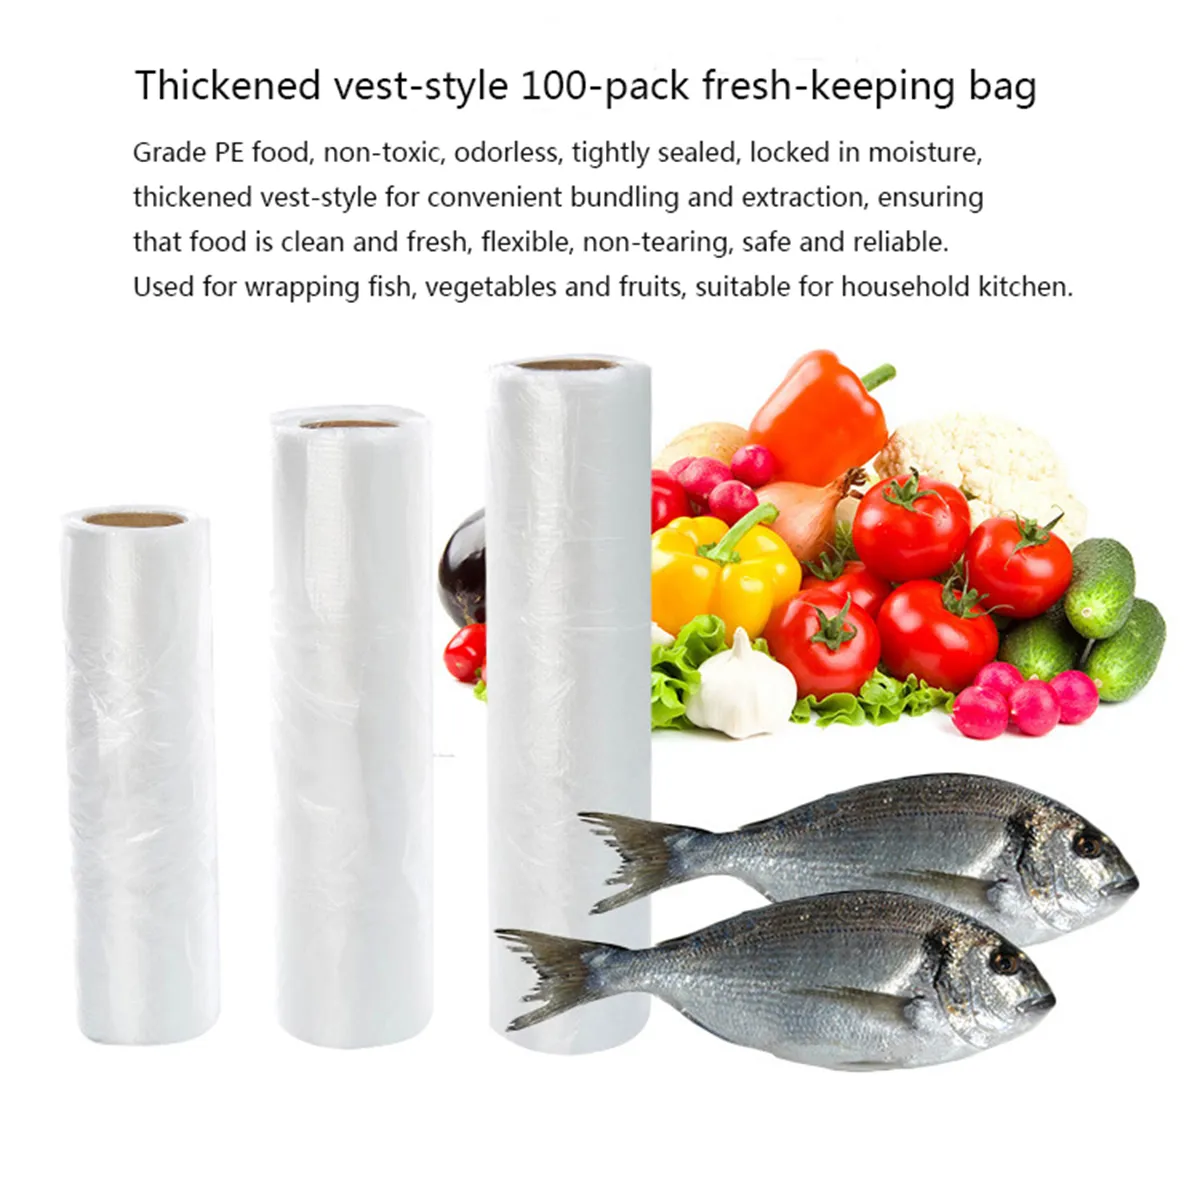 100-pack Food and Fridge Freezer Bags Rolls Clear Plastic Bag Disposable Thickened Vest-style Fresh-keeping Bag with Tie Handles White big image 1